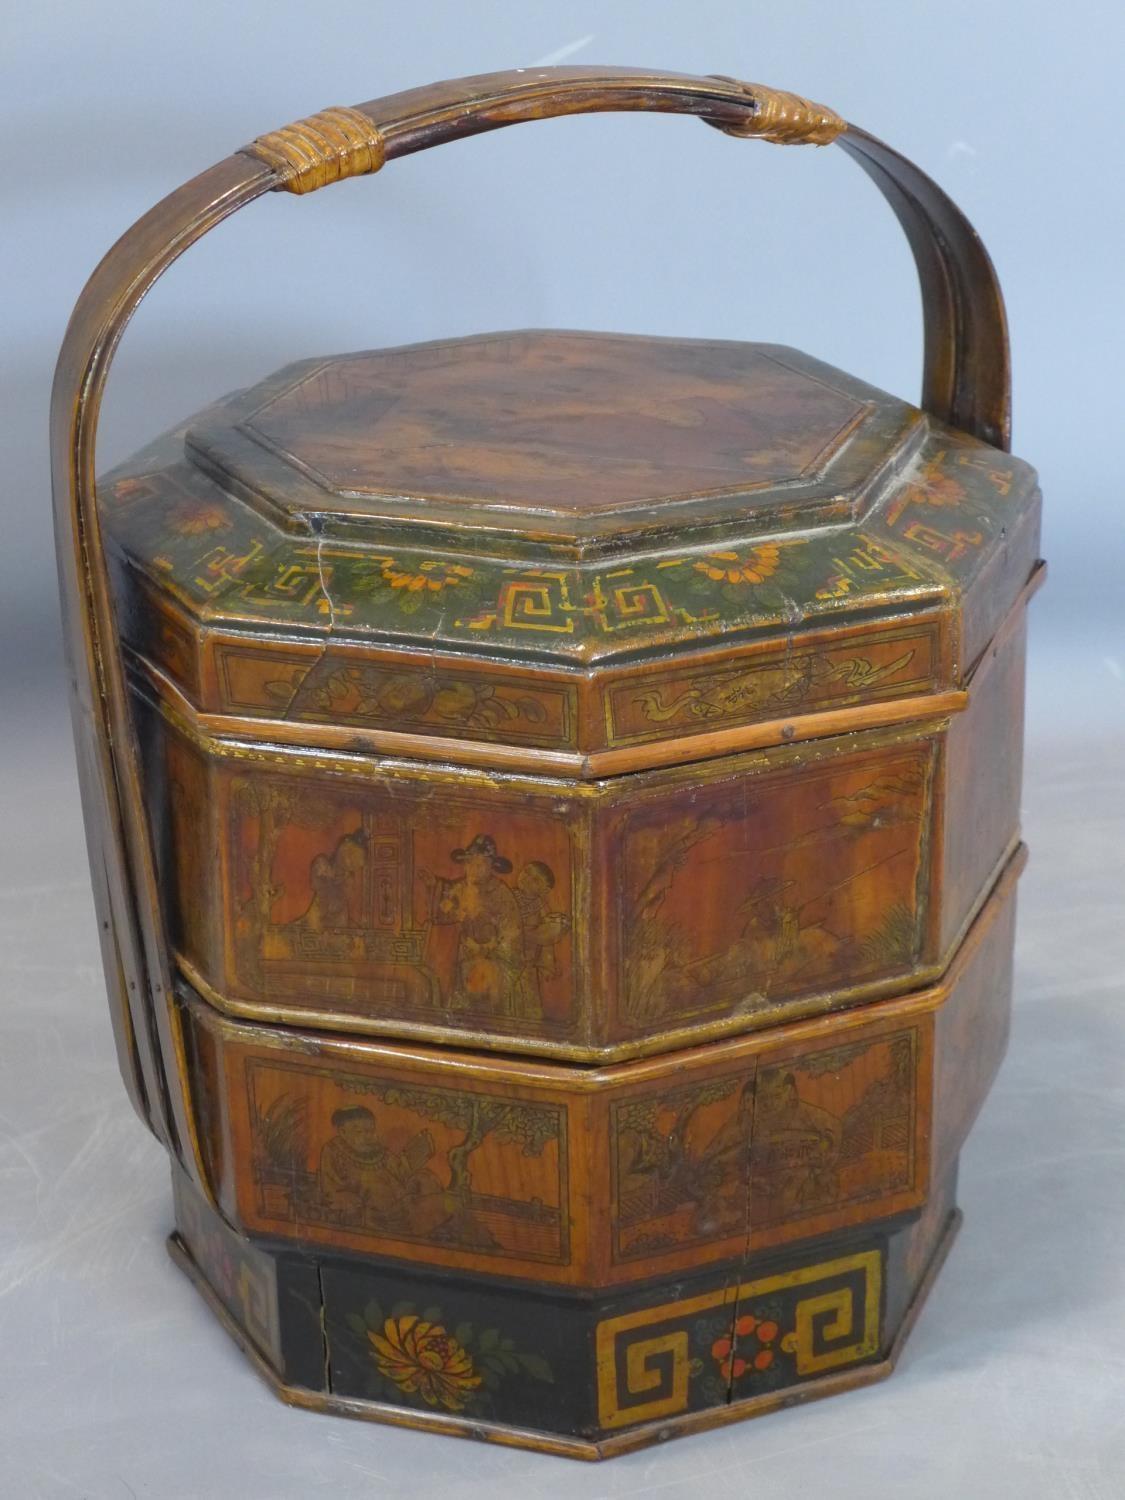 A late 19th century Qing Dynasty fir wood wedding cake box, decorated with panels depicting figures,